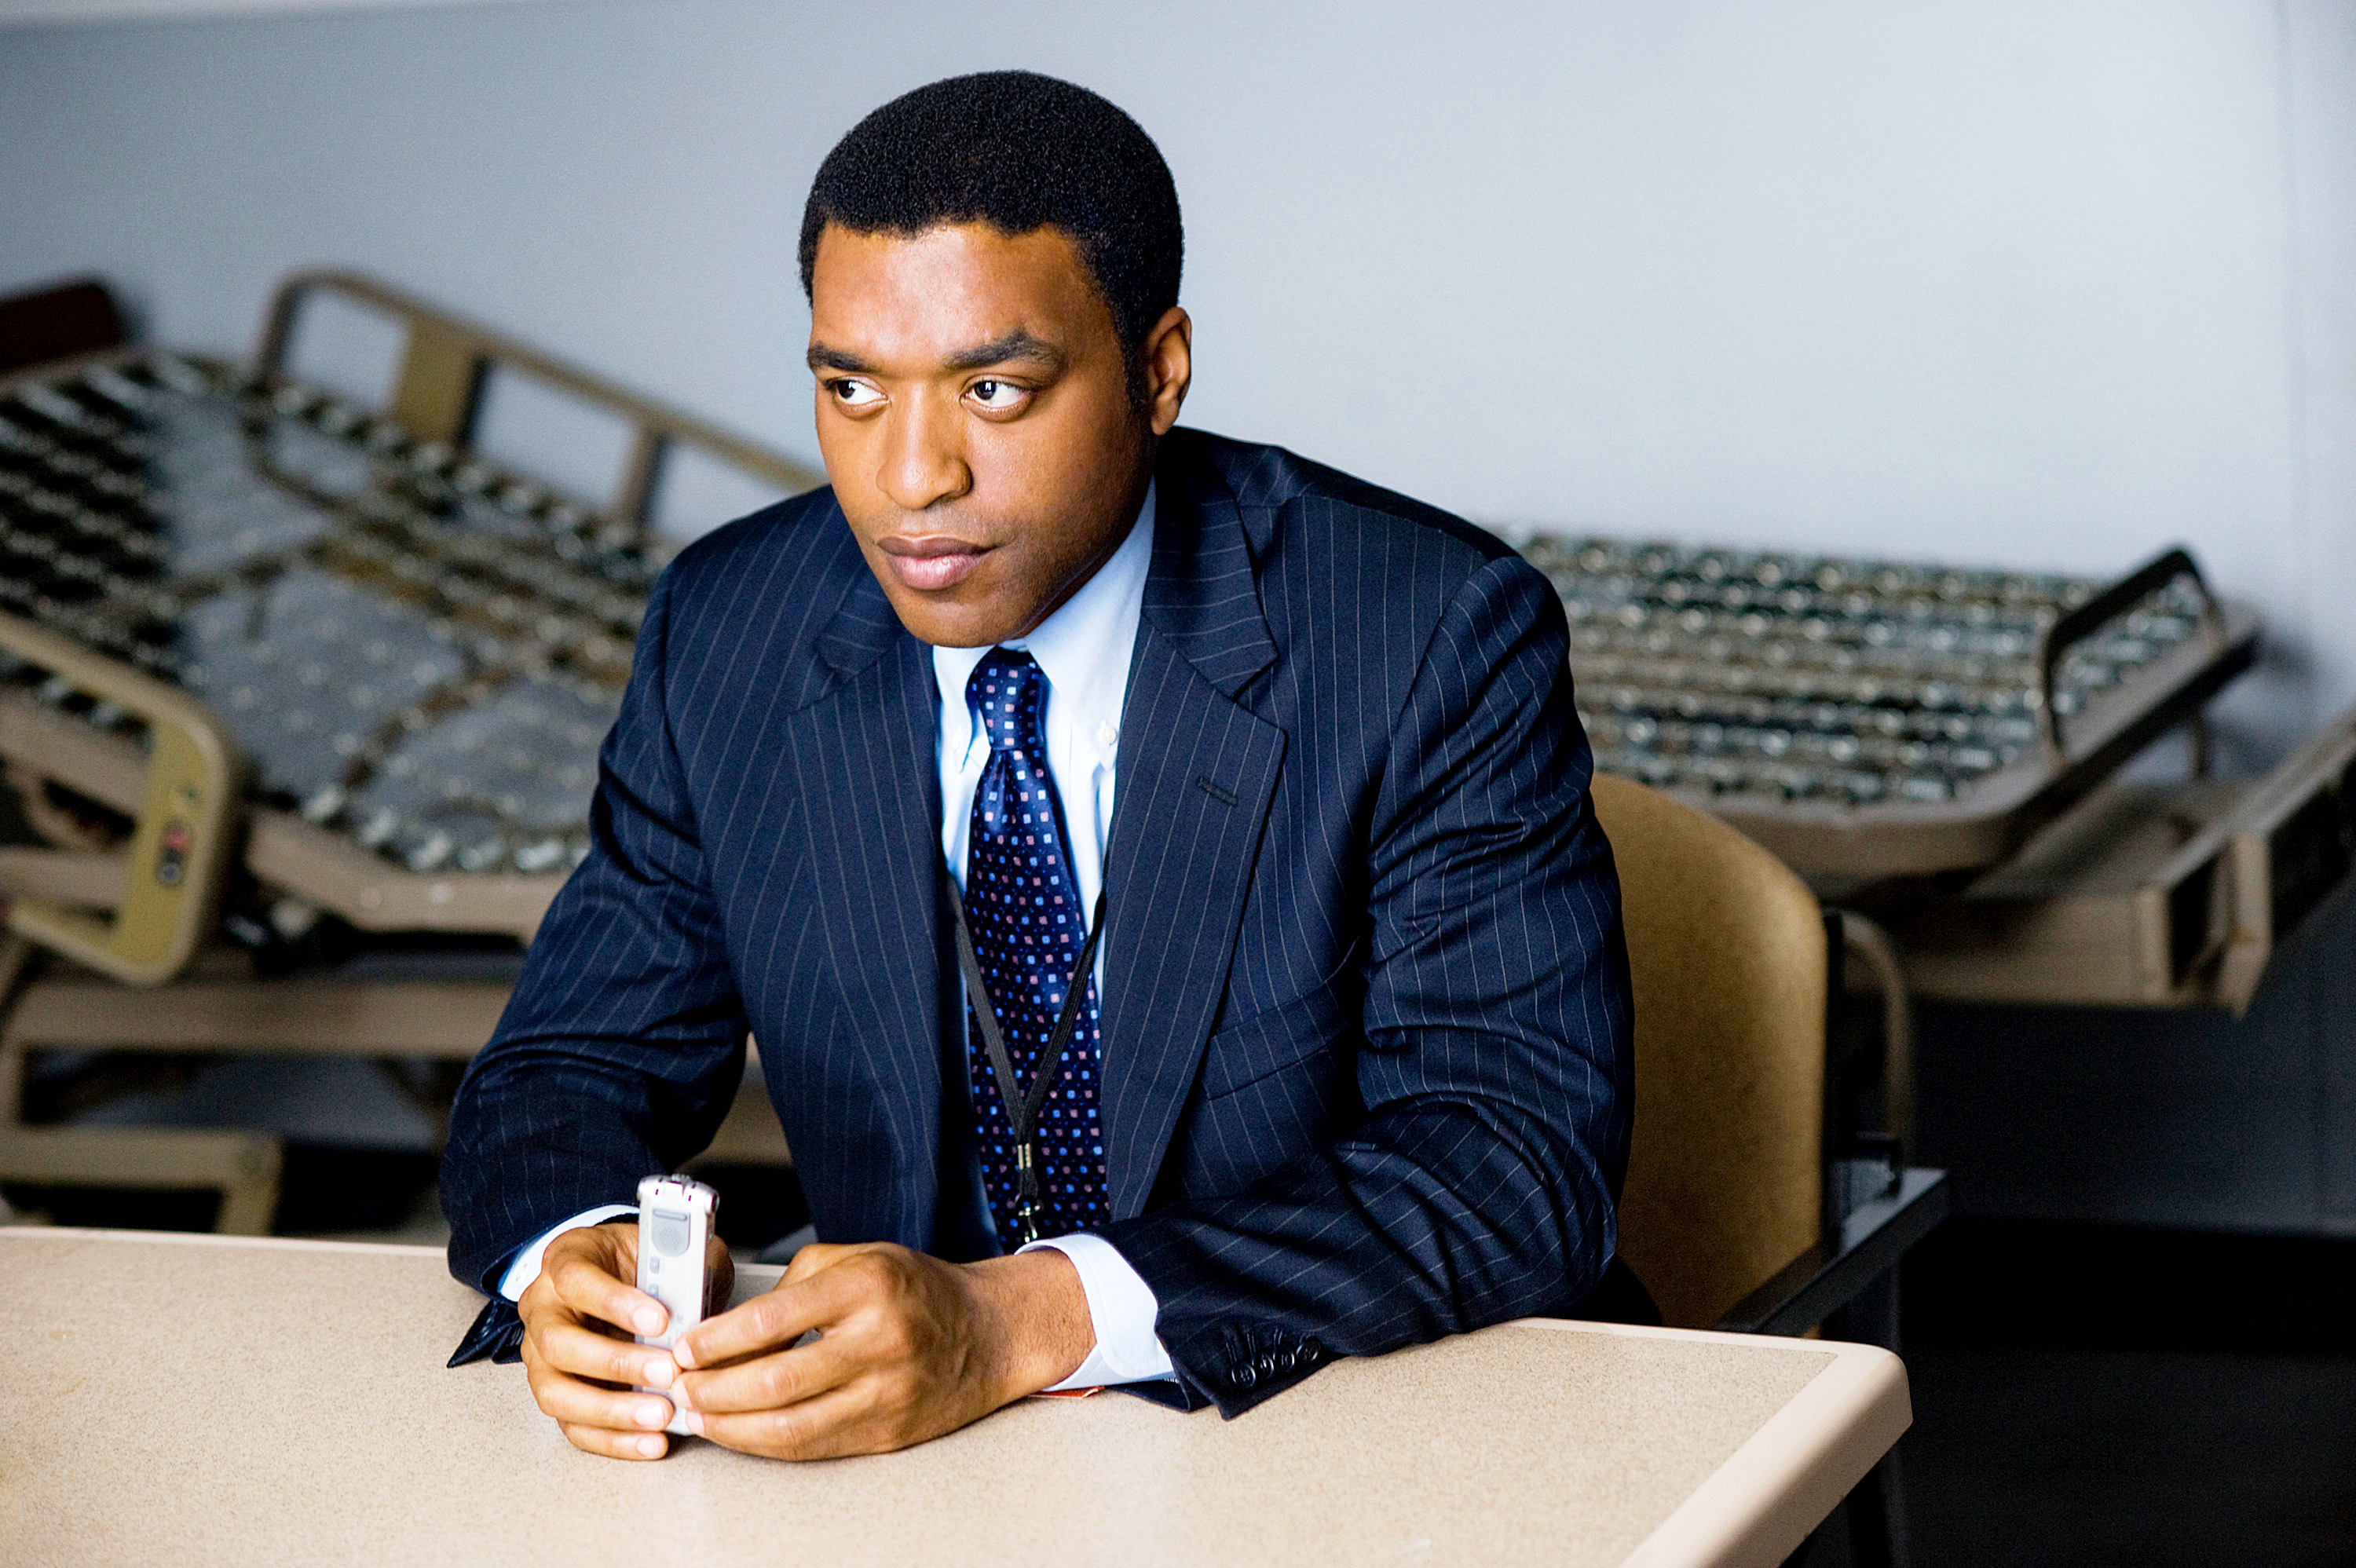 Chiwetel Ejiofor stars as Peabody in Columbia Pictures' Salt (2010)